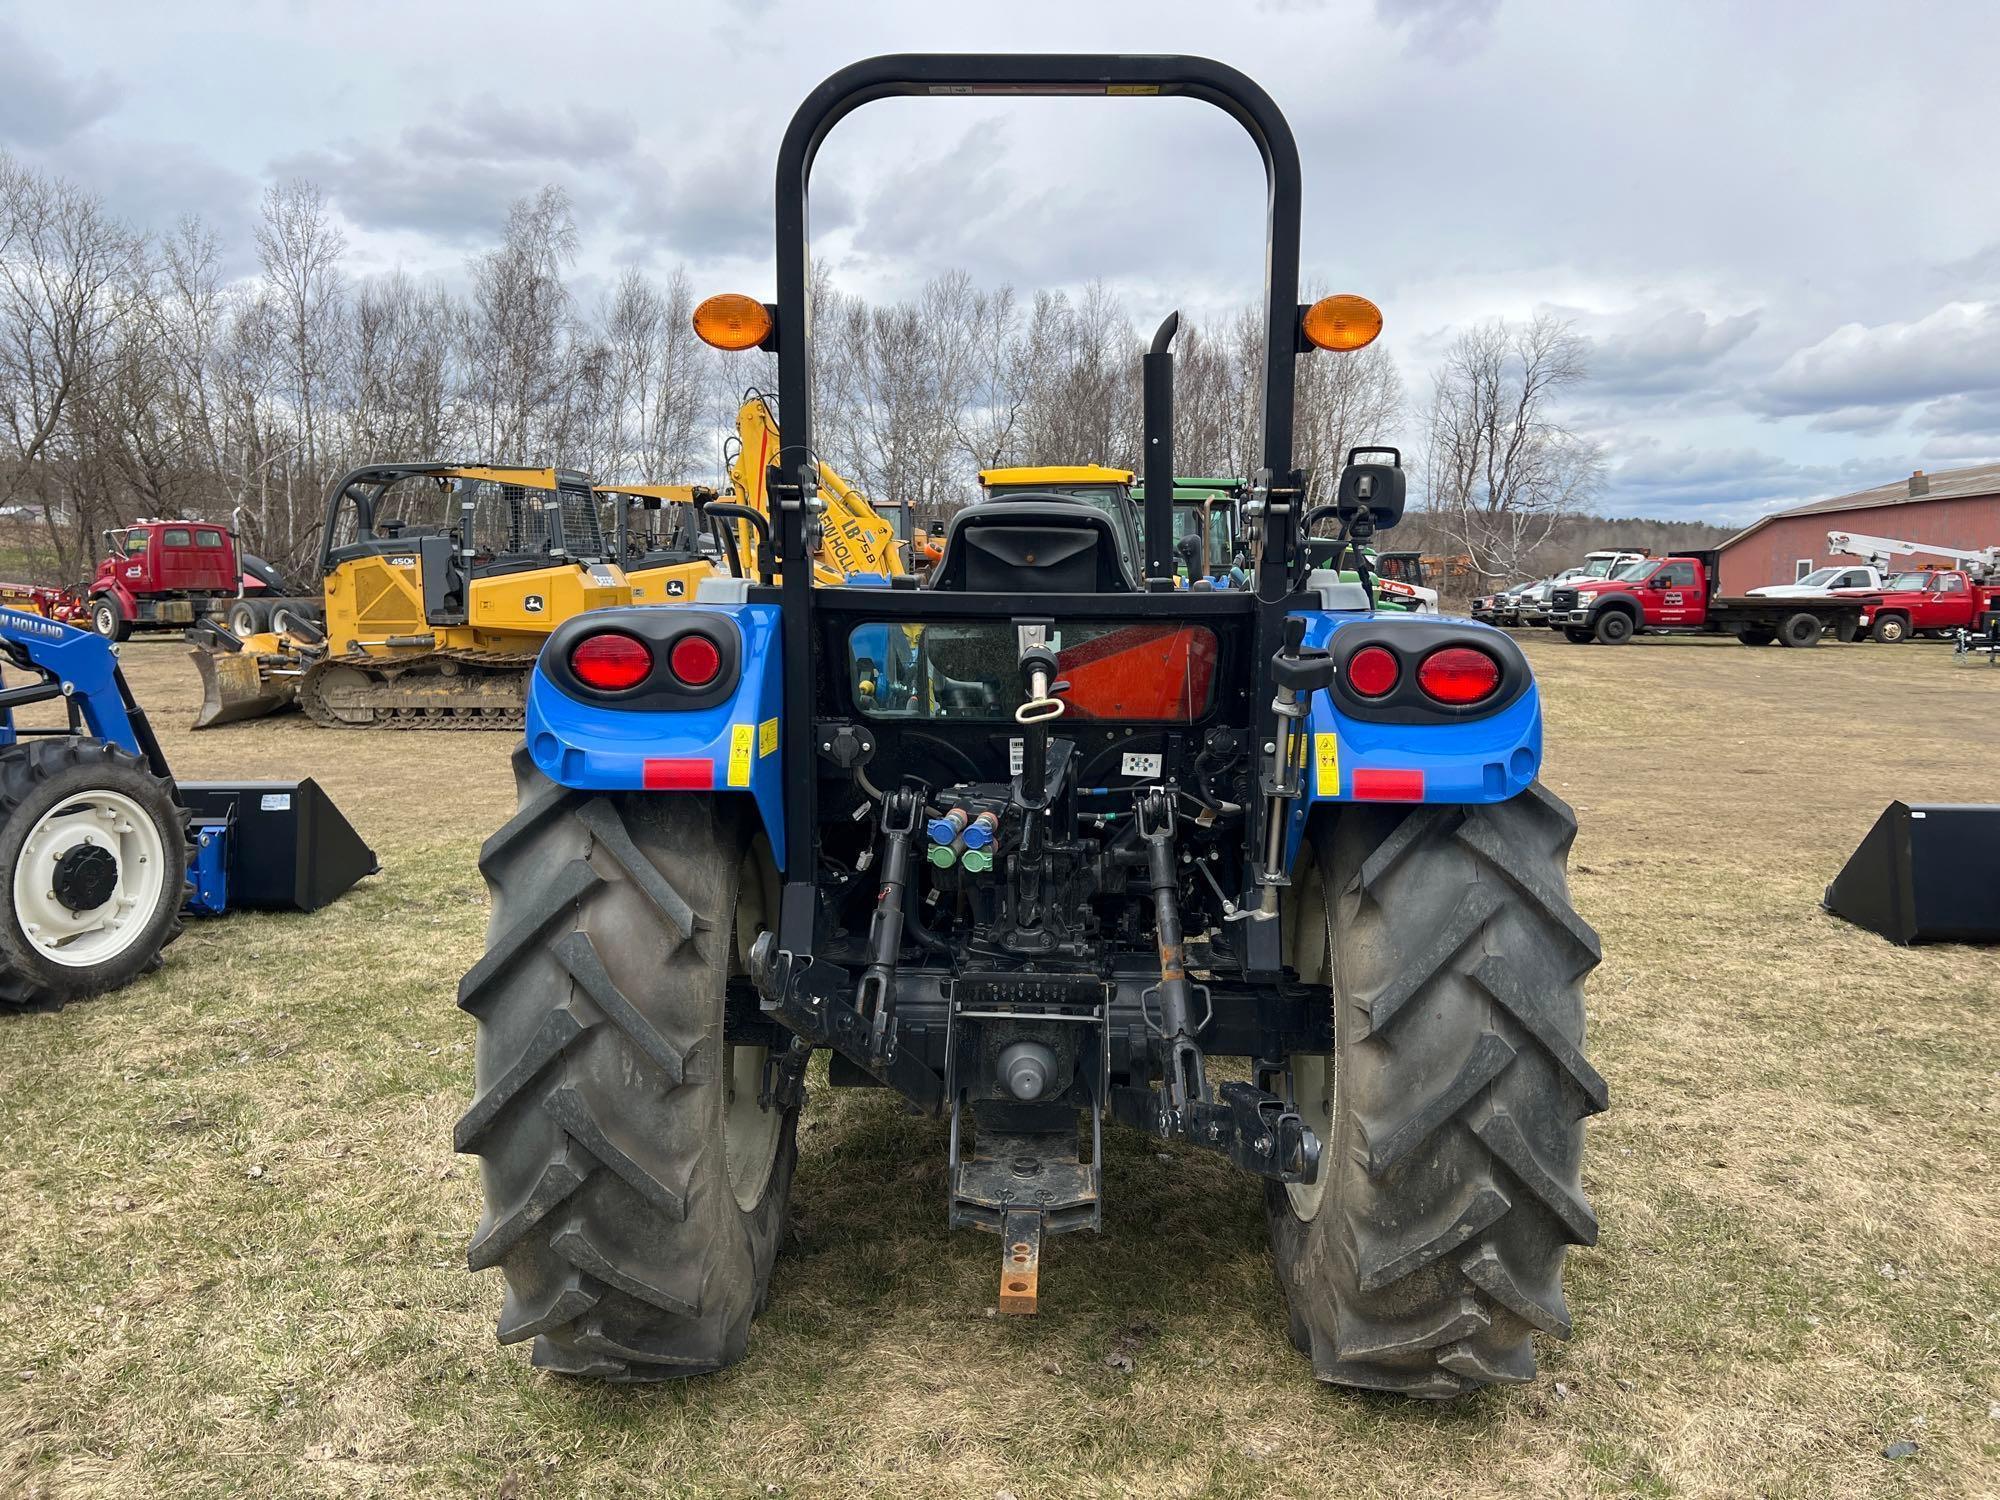 NEW NEW HOLLAND WORKMASTER 75 TRACTOR LOADER 4x4, powered by diesel engine, 75hp, equipped with